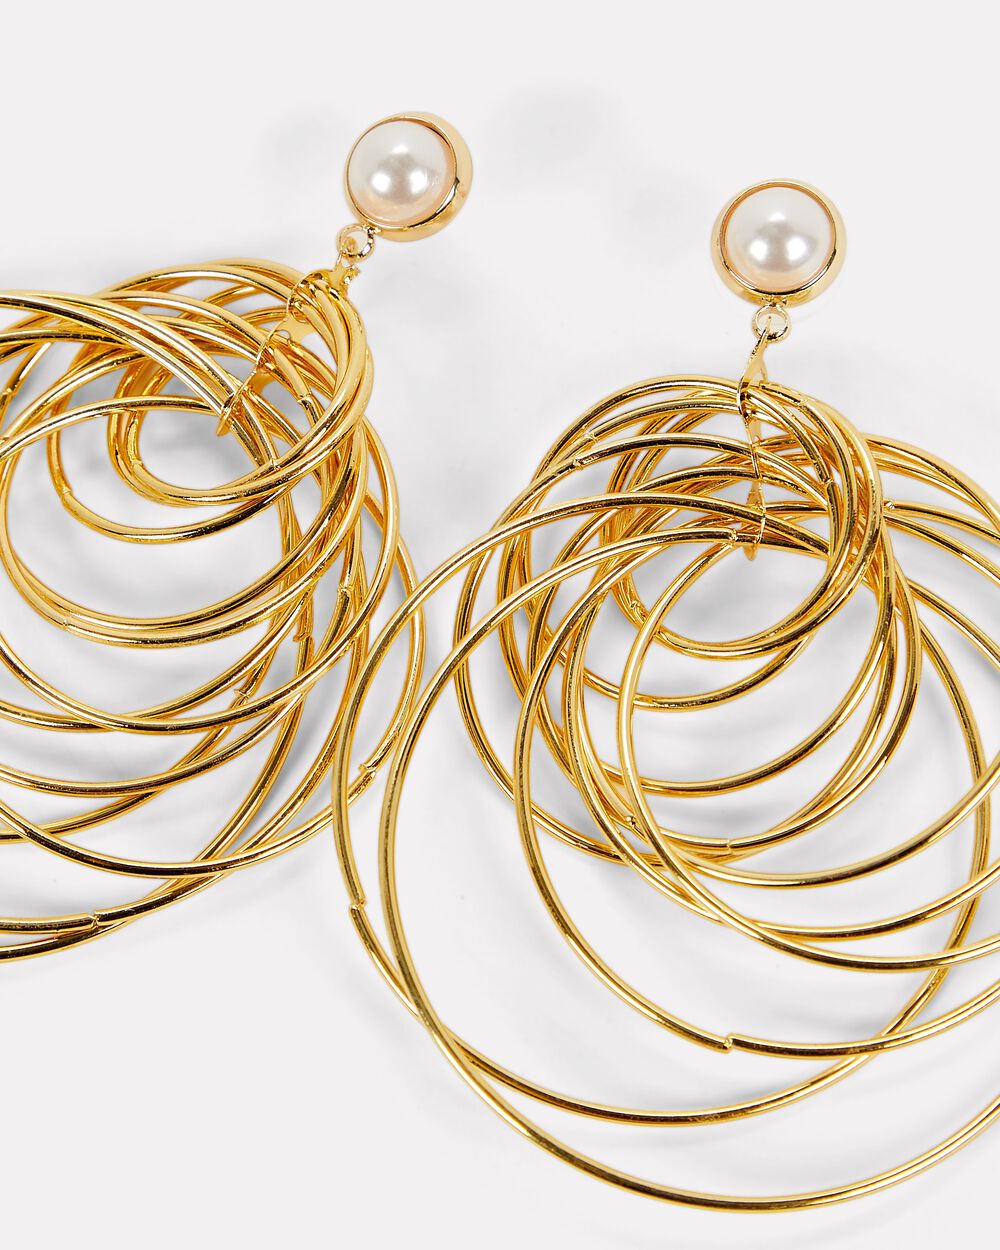 SHASHI Pearl Intertwined Rings Earrings | INTERMIX®